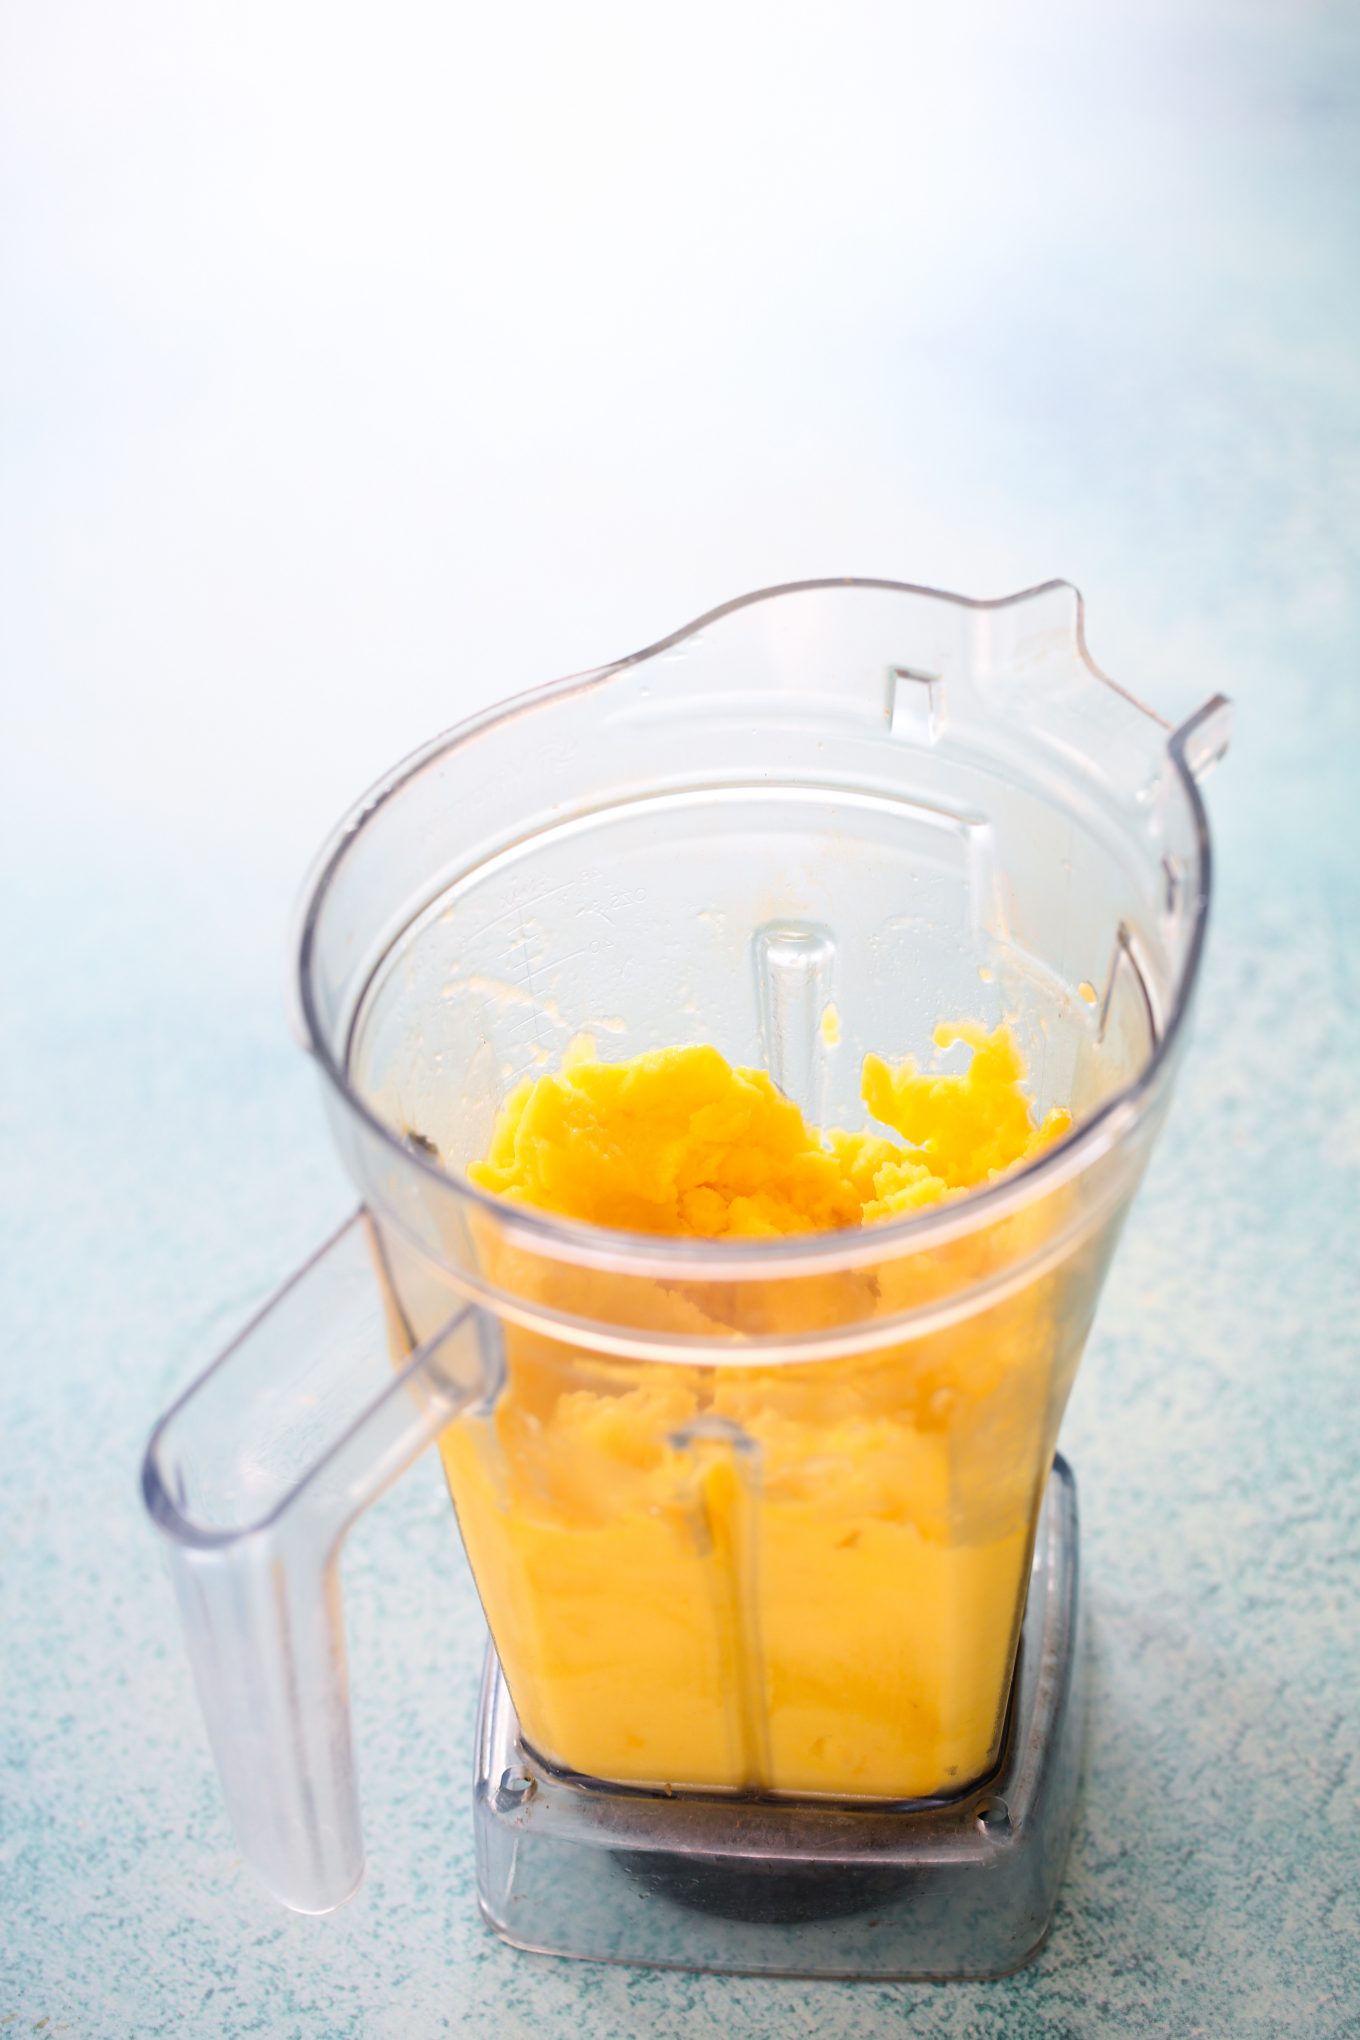 Pureed mango in the blender container